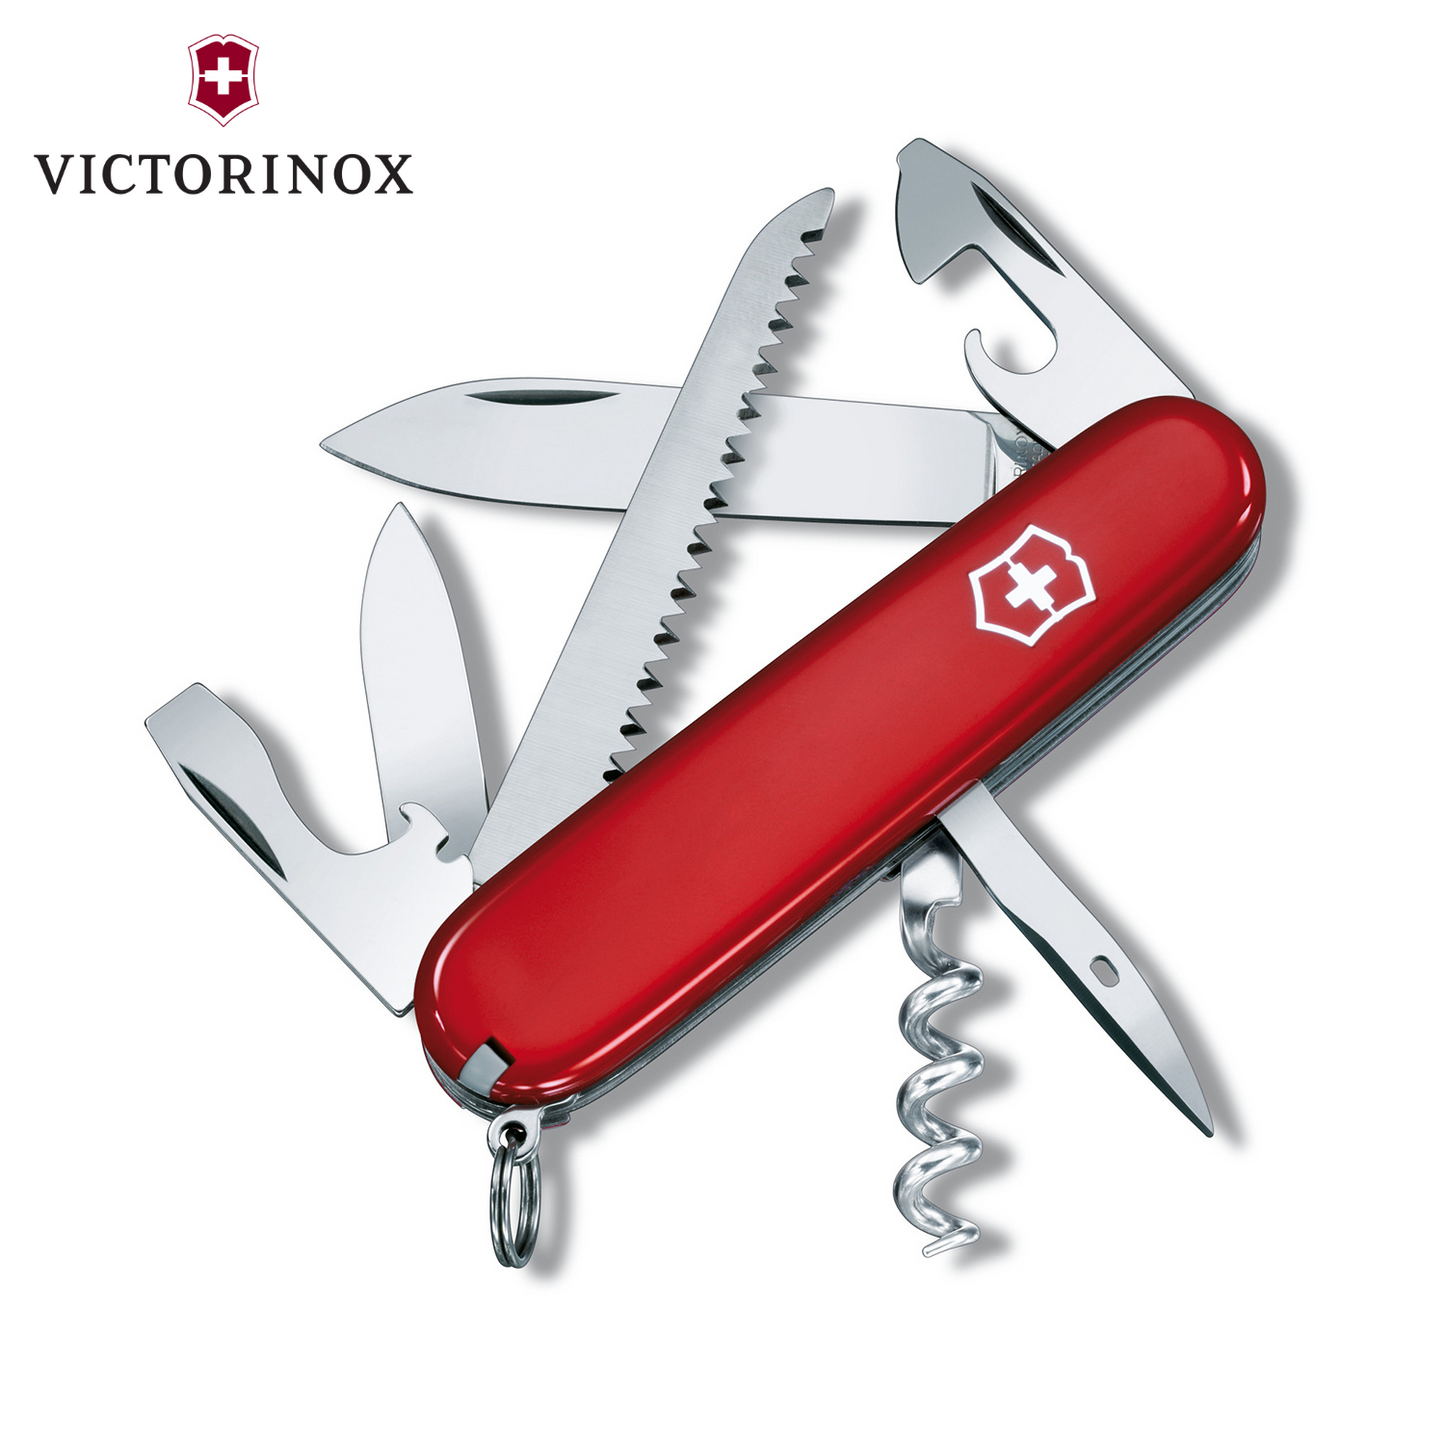 Victorinox Camper: Essential Tool for Camping